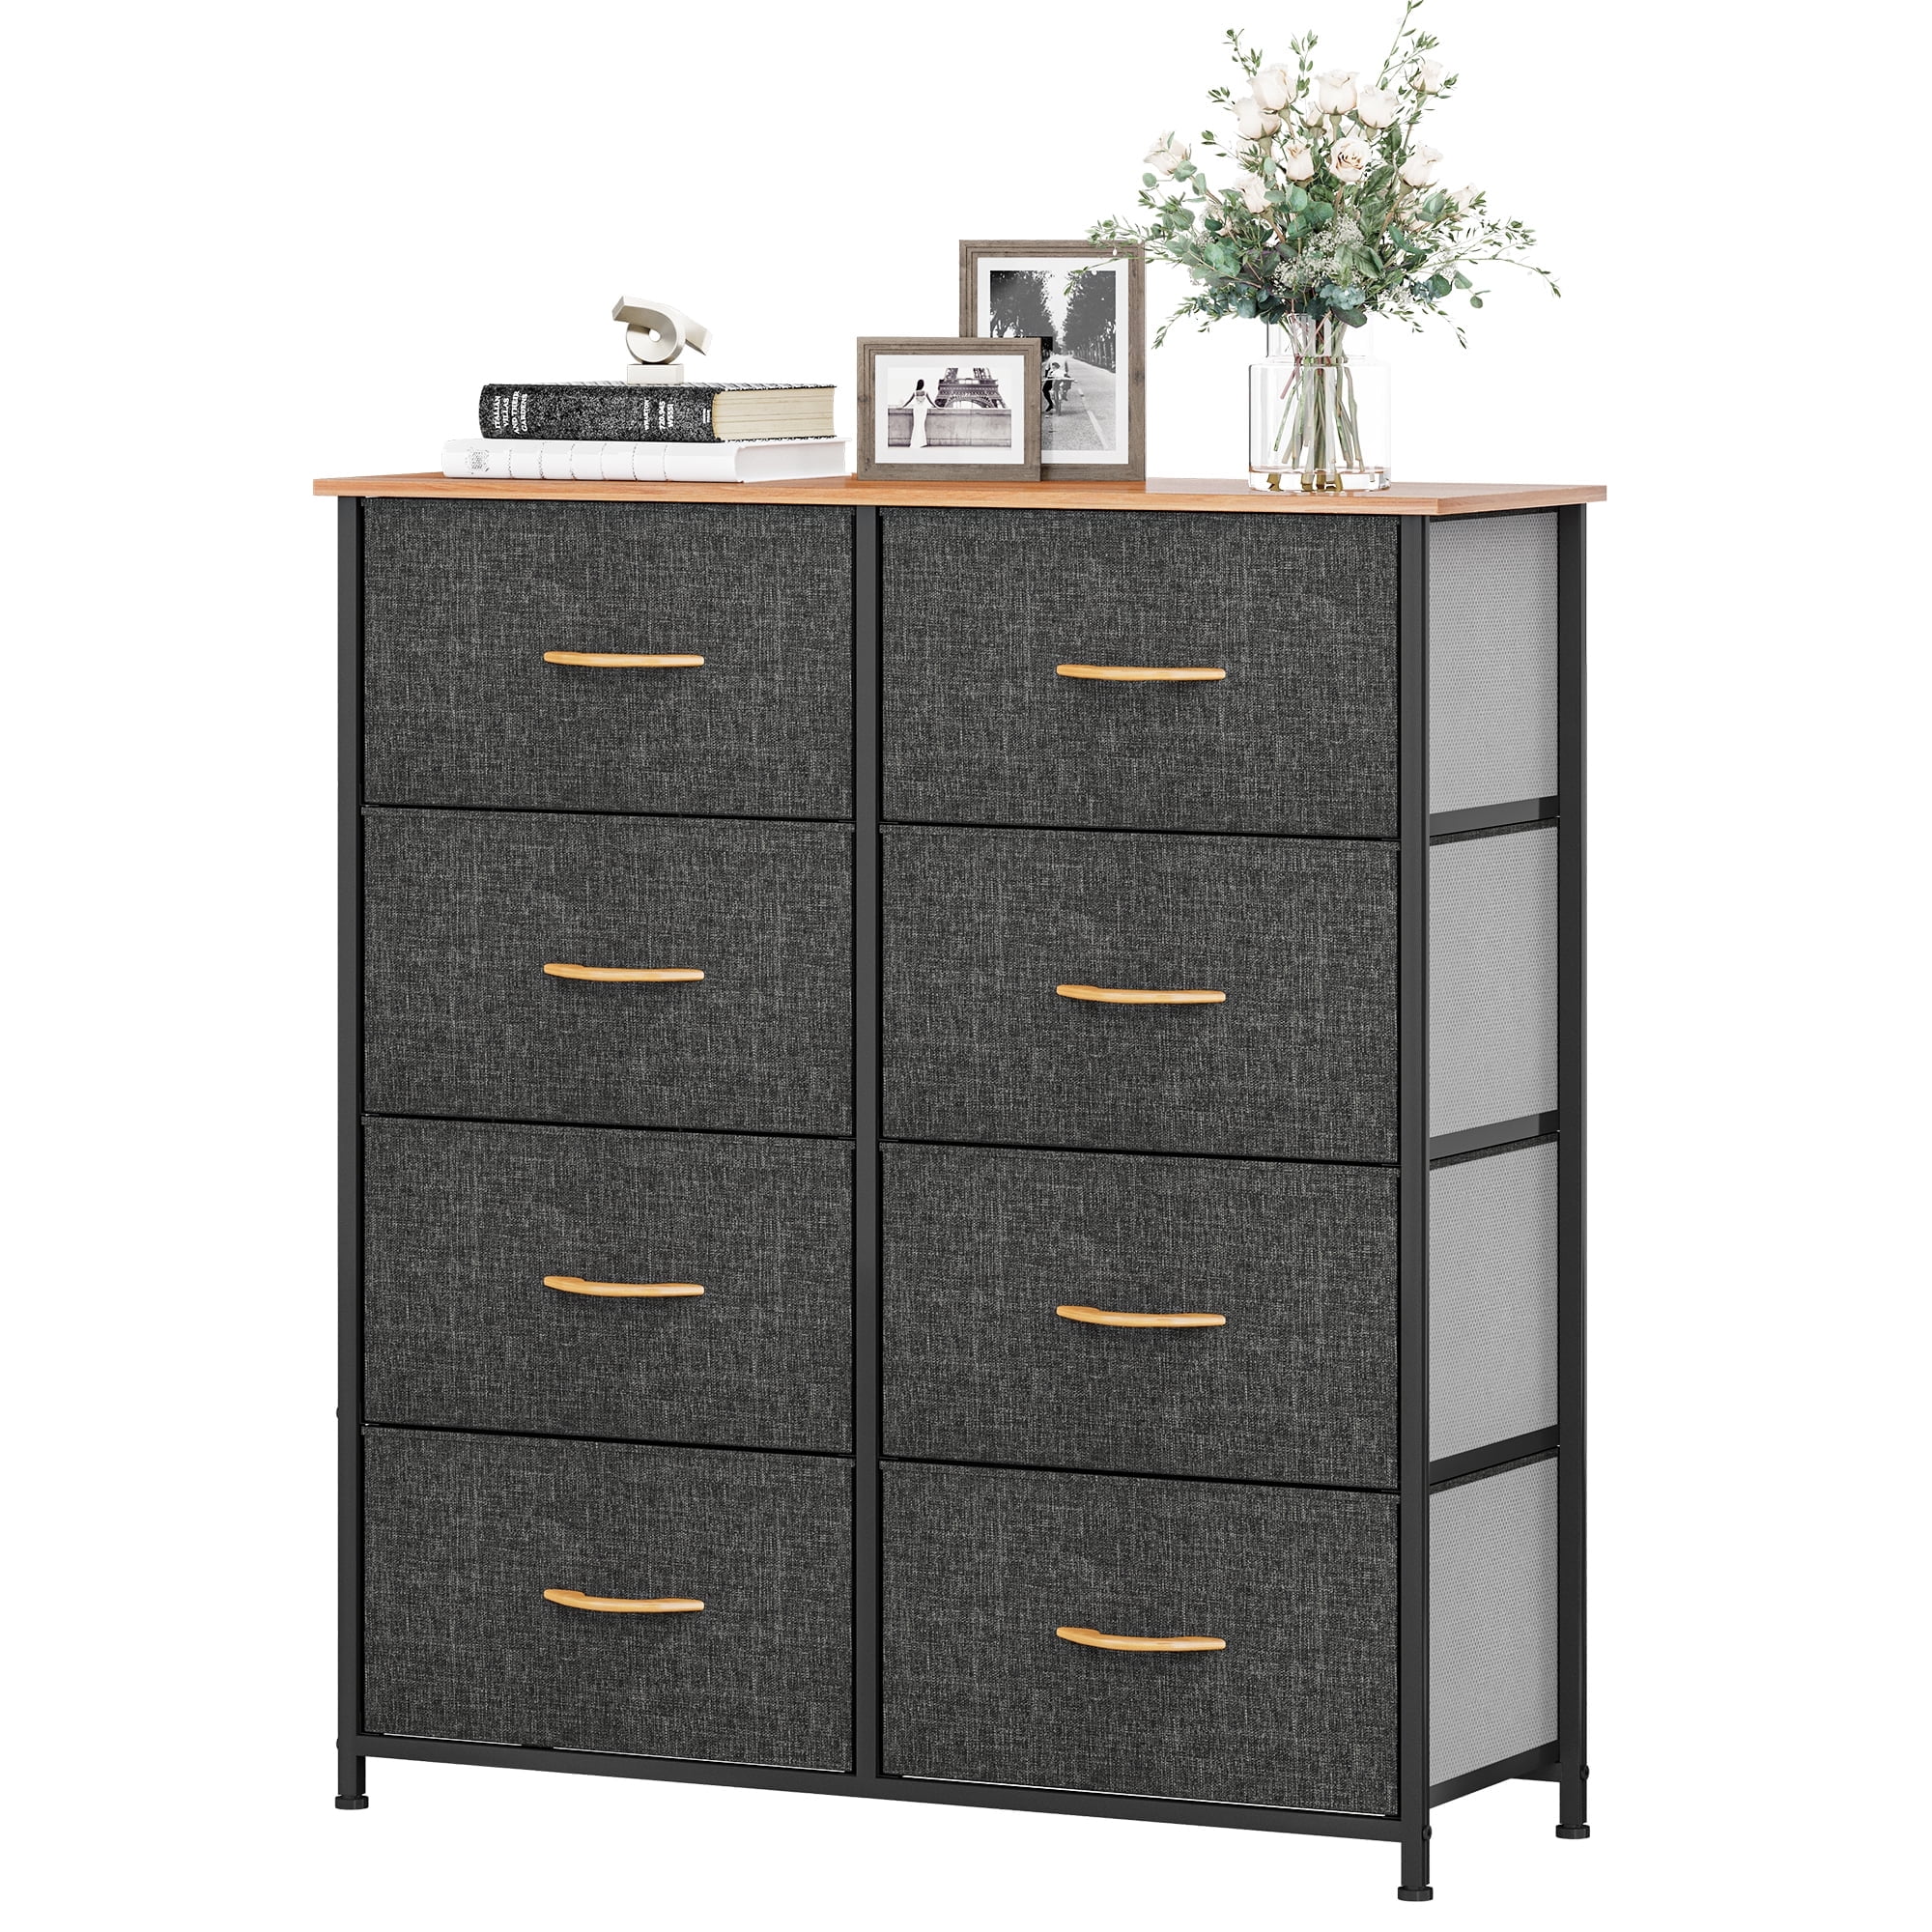 YITAHOME Fabric Dresser with 7 Drawers - Storage Tower with Large Capacity,  Organizer Unit for Bedroom, Living Room & Closets - Sturdy Steel Frame